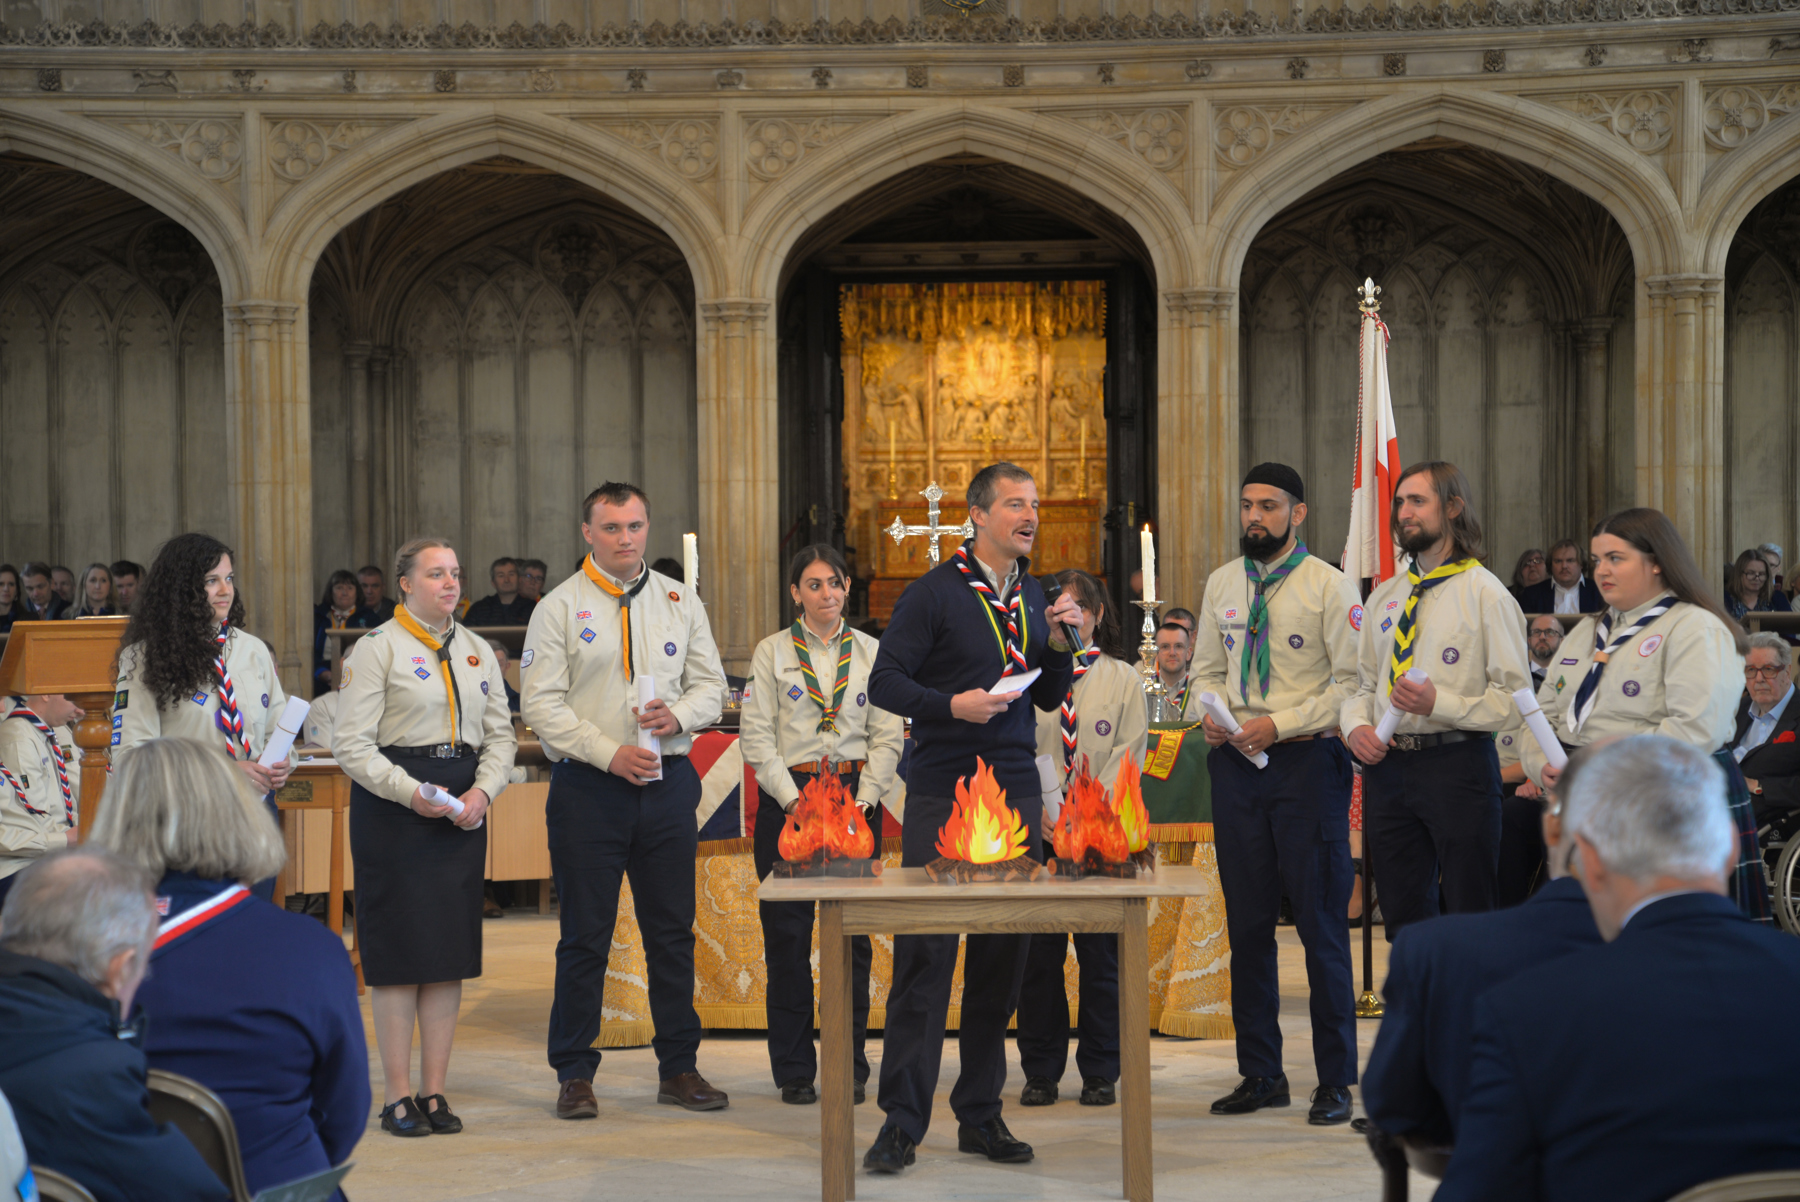 Chief Scout Bear Grylls is standing in a chapel holding a microphone as he gives a speech. Stood behind him are a row of Scouts in uniforms and neckers.